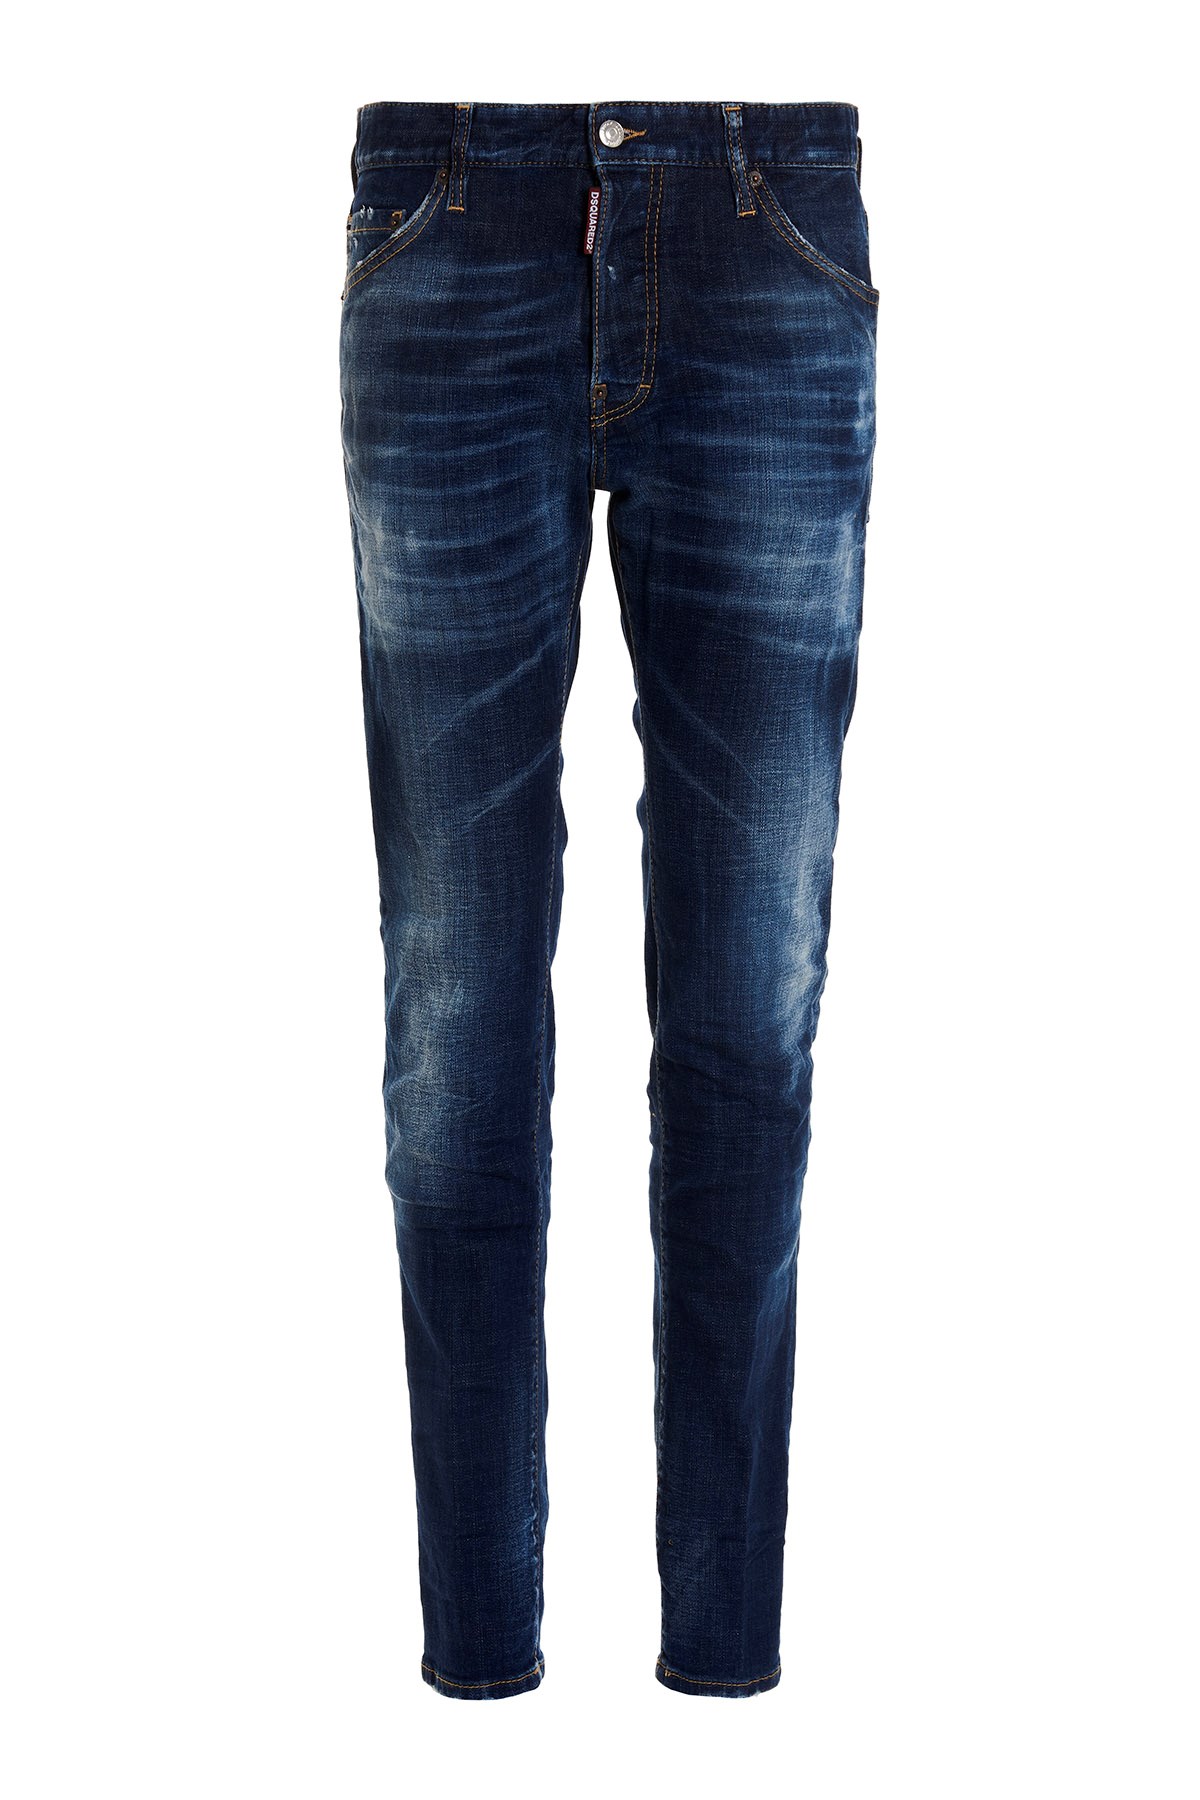 DSQUARED2 'Cool Guy Jean' Jeans